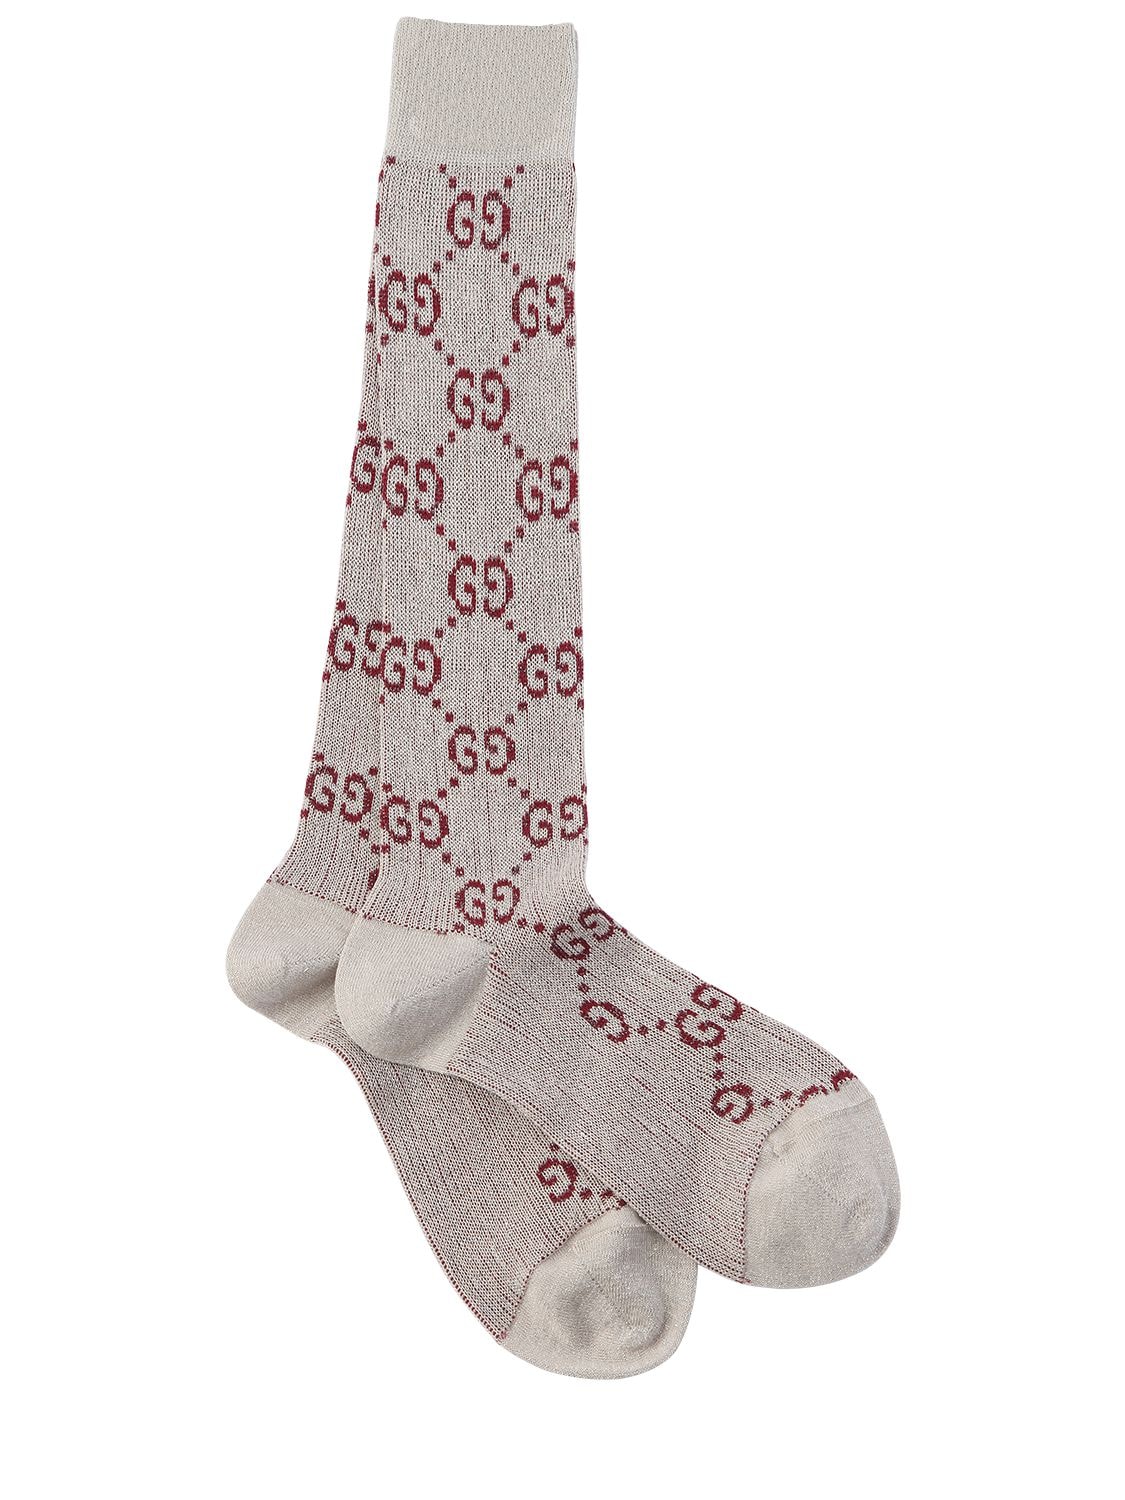 Gucci Gg Supreme Knee High Cotton Blend Socks In Ivory